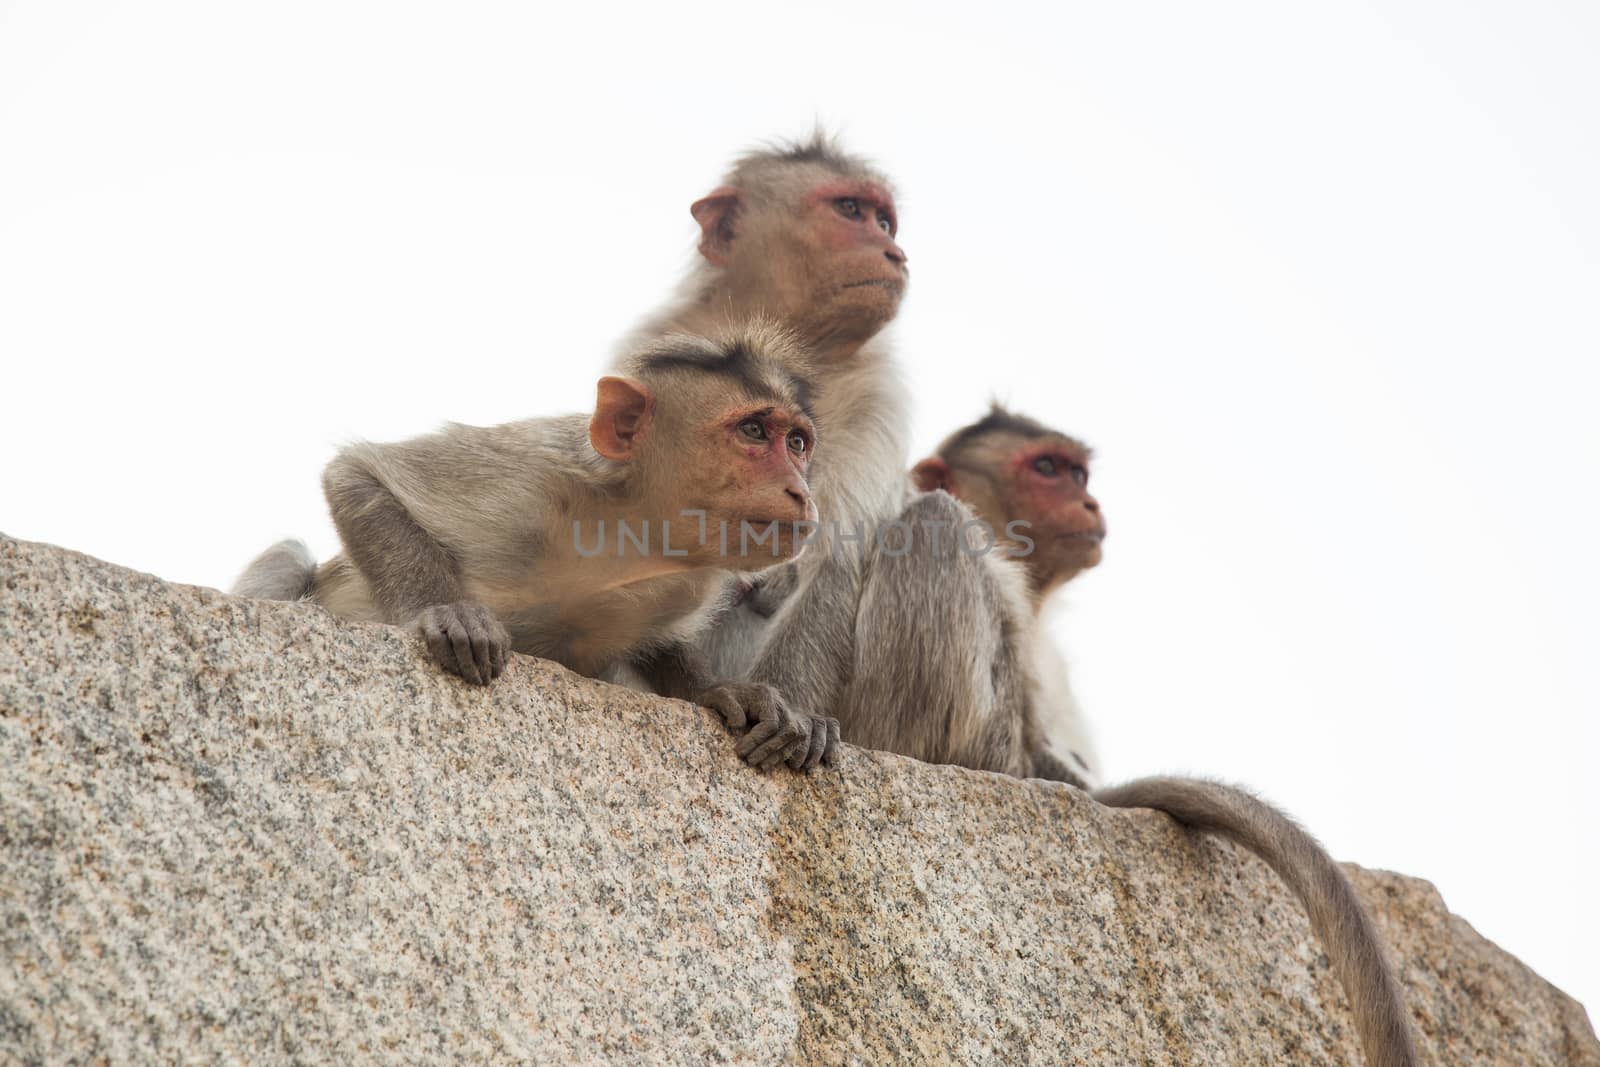 Monkeys sitting on rocks and looking at something